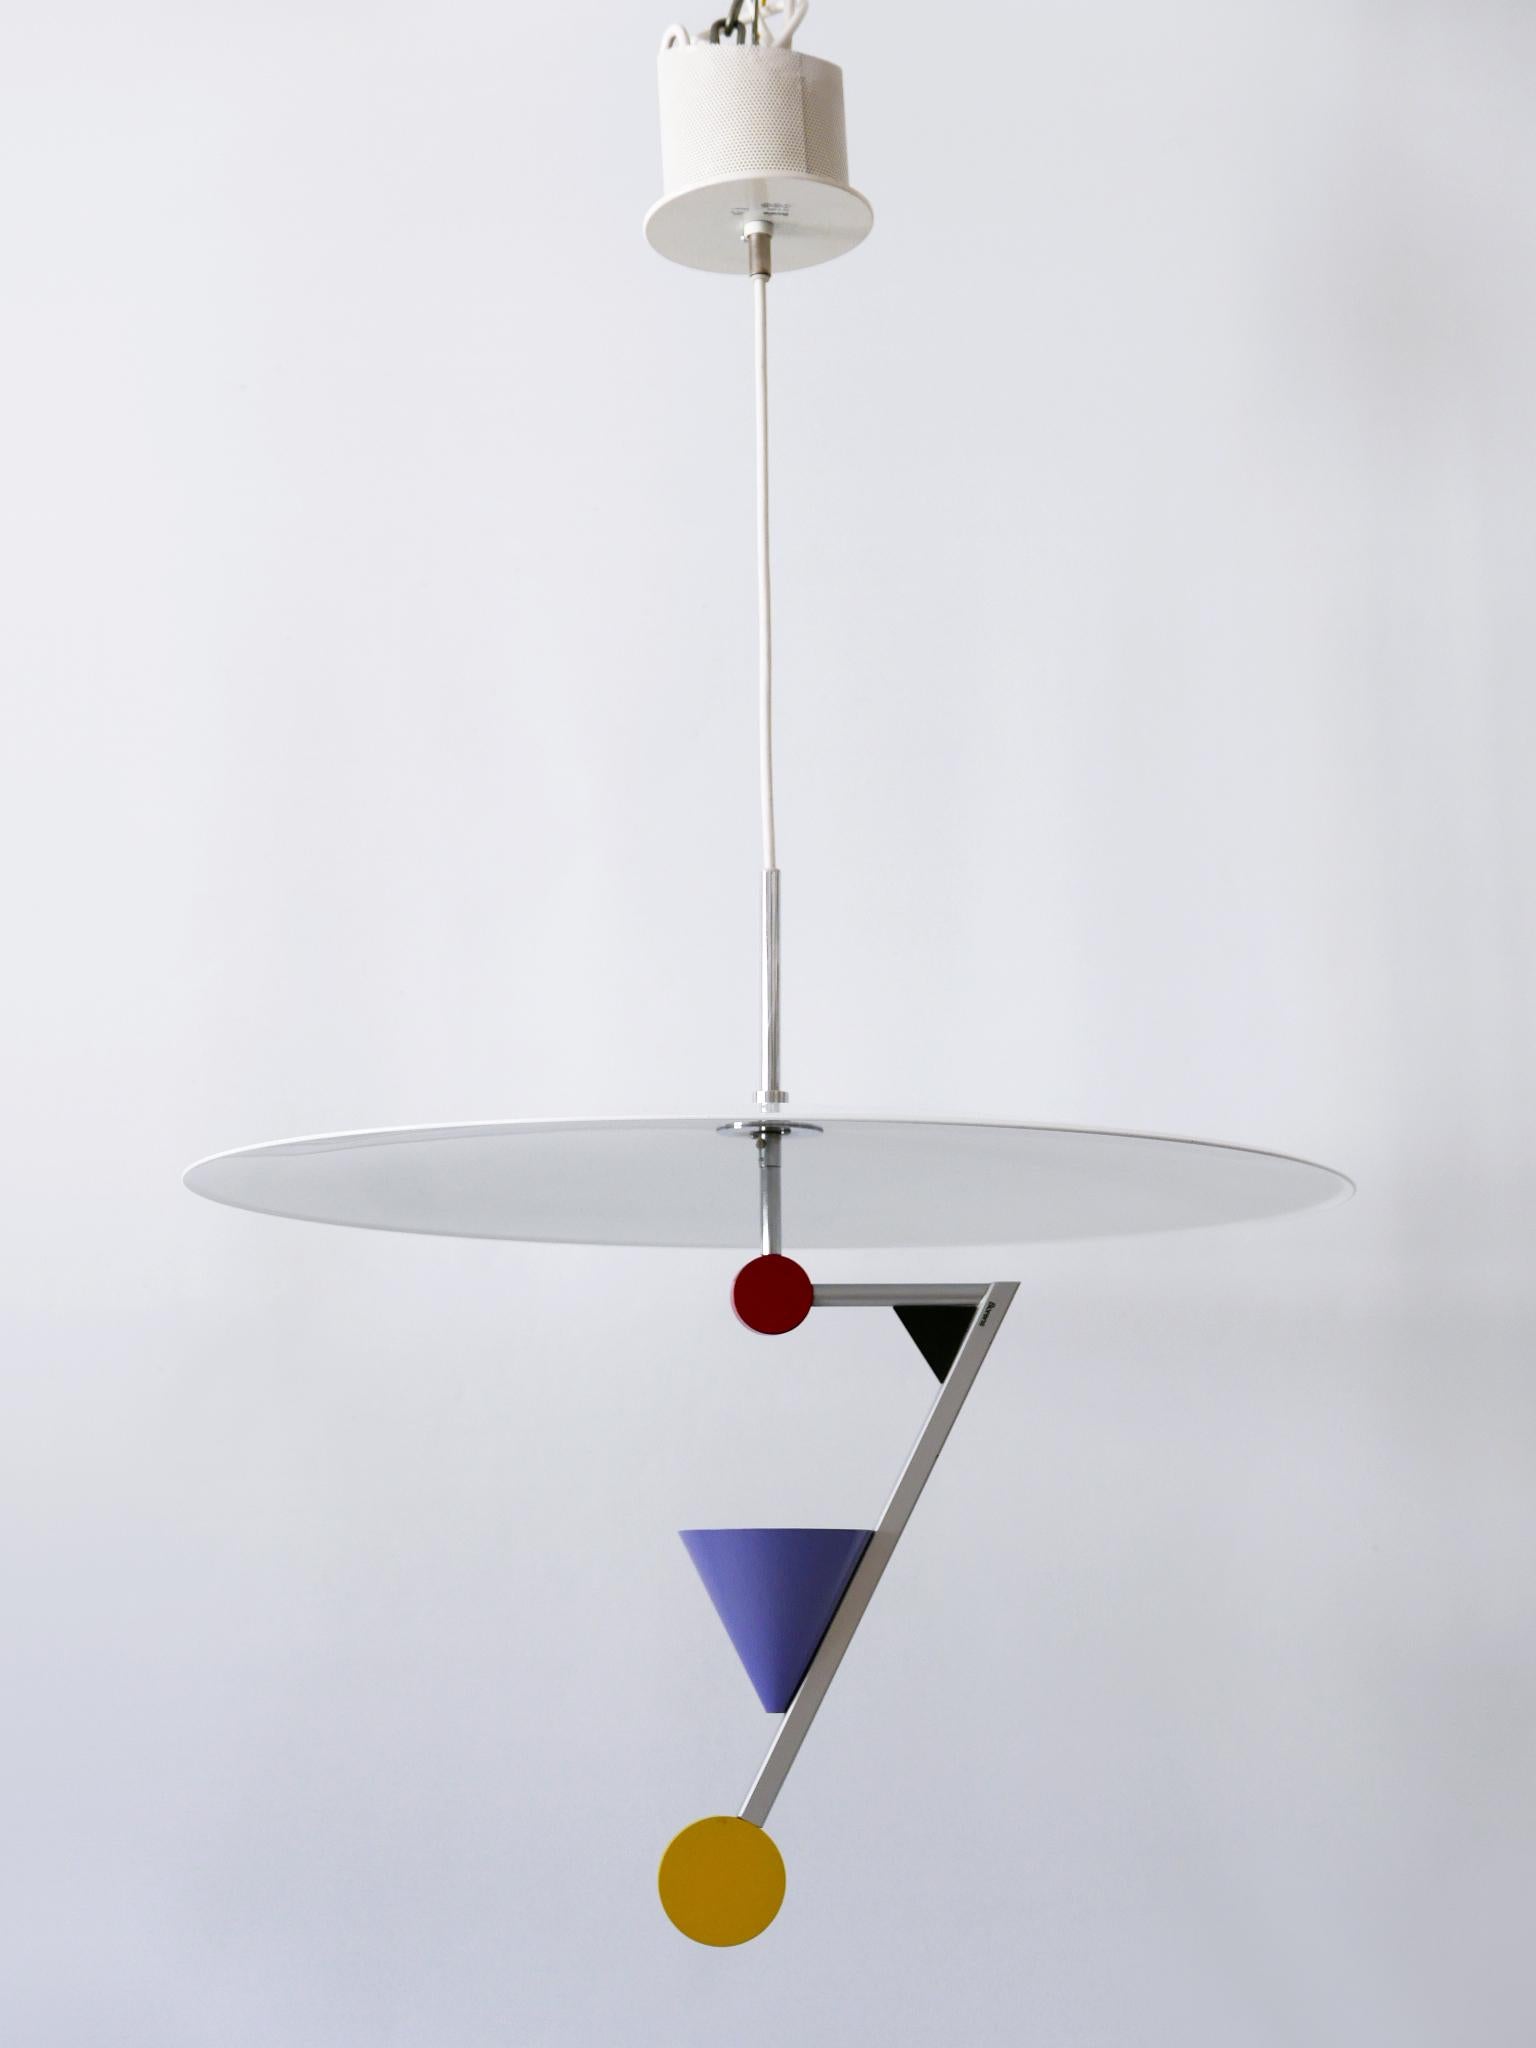 Incroyables lampes suspendues postmodernes Halo There d'Olle Andersson pour Borens 1982 en vente 6